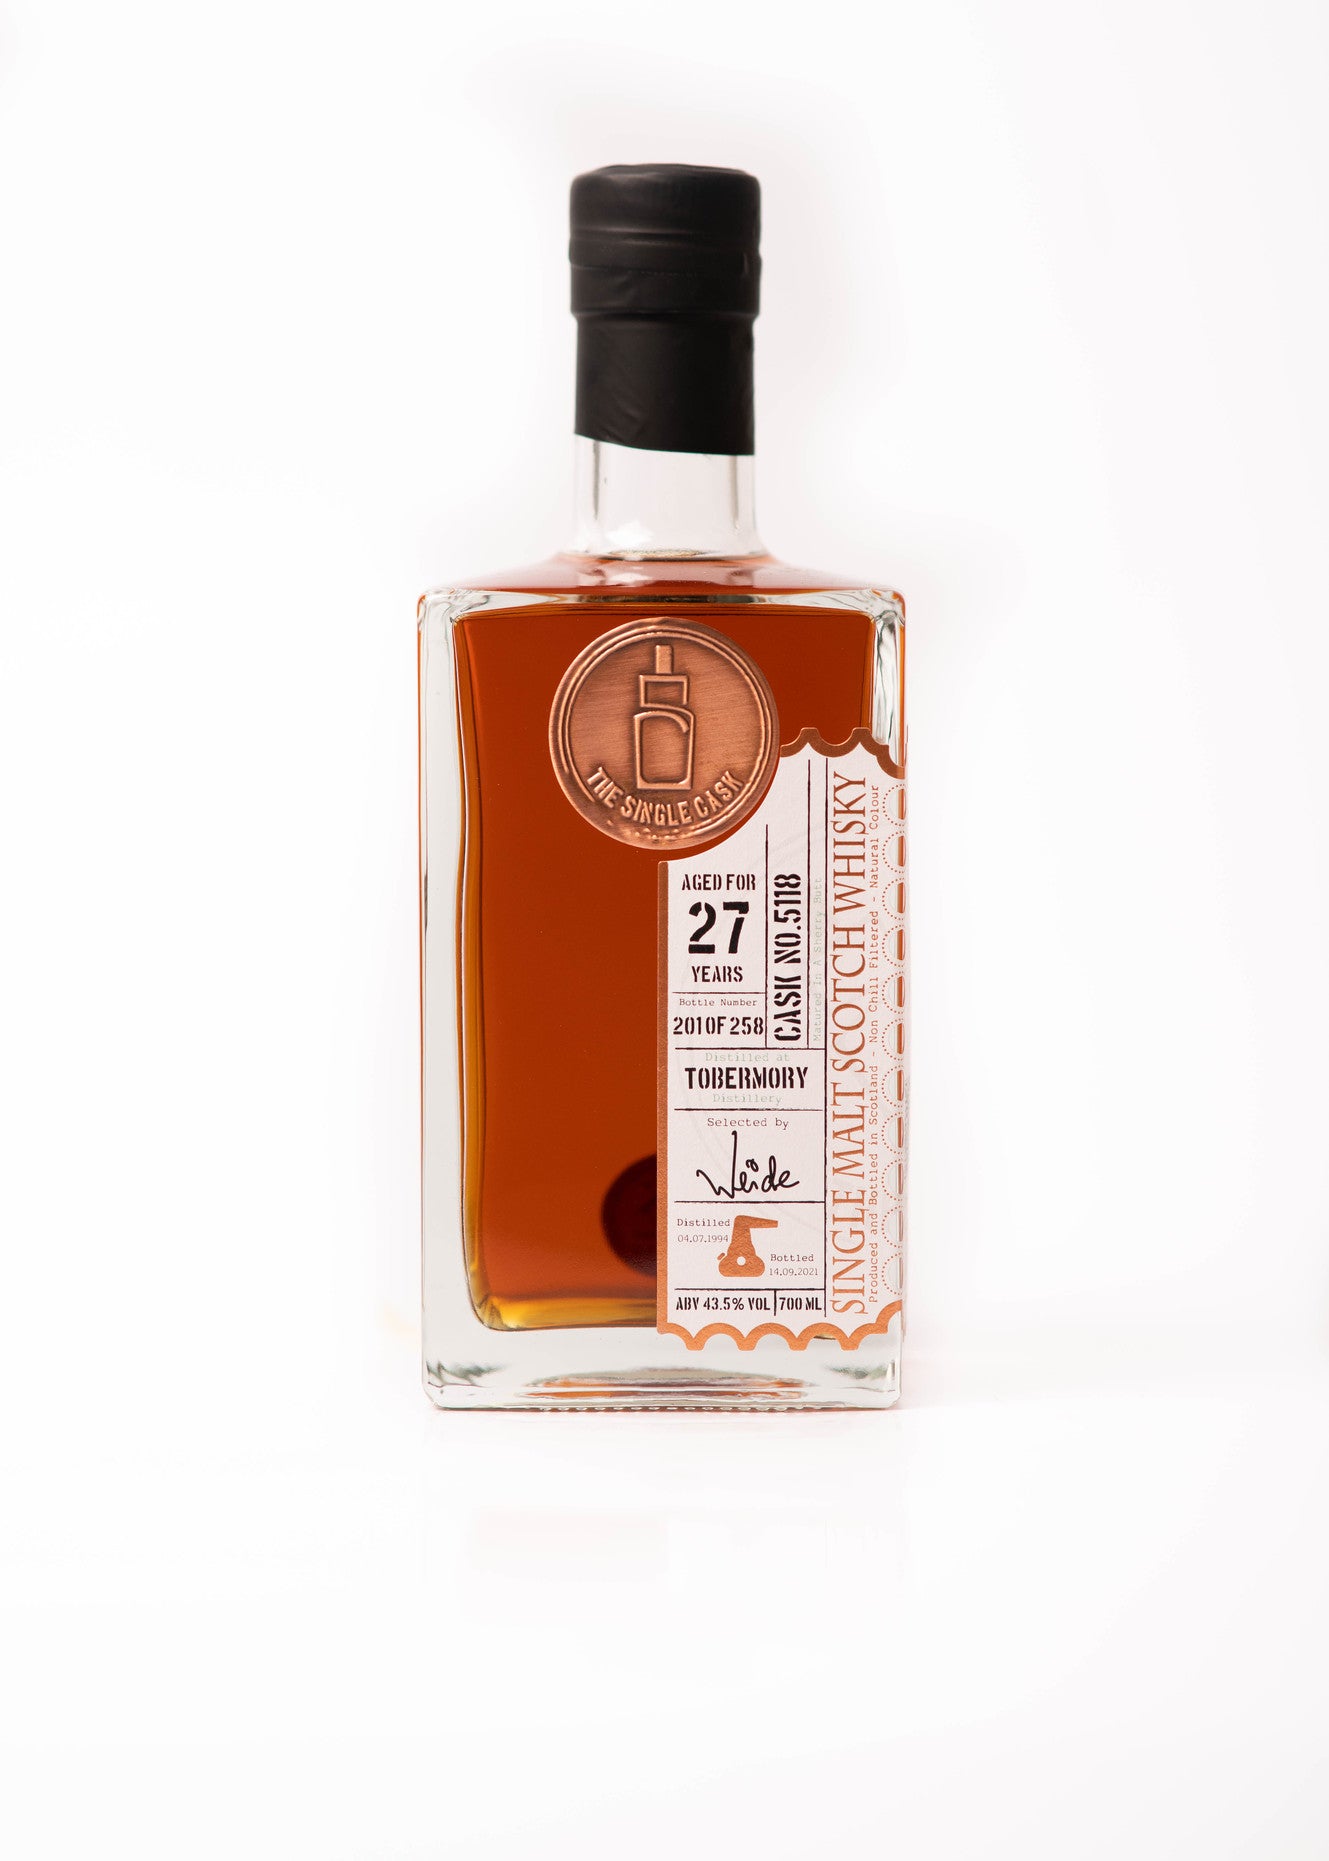 Tobermory 27 years old scotch whisky from The Single Cask